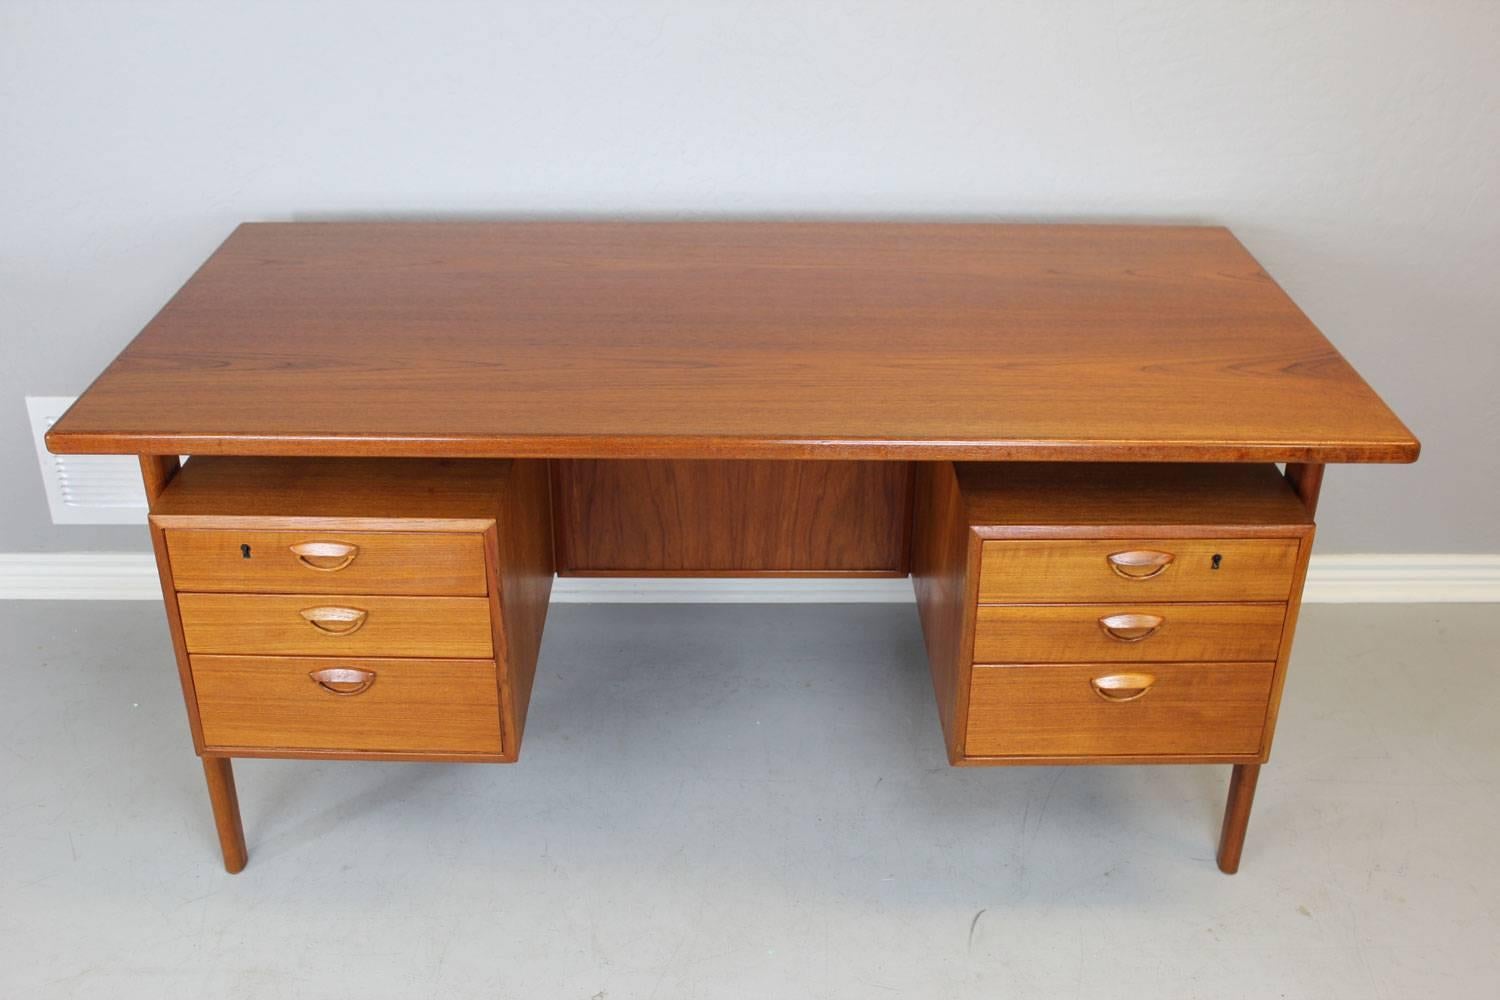 Floating teak desk by Kai Kristiansen, circa late 1950s. On the back side of this desk there is one open compartment and also two cabinet doors that contain storage compartments. Note the floating teak top and six drawers with teak handles. This